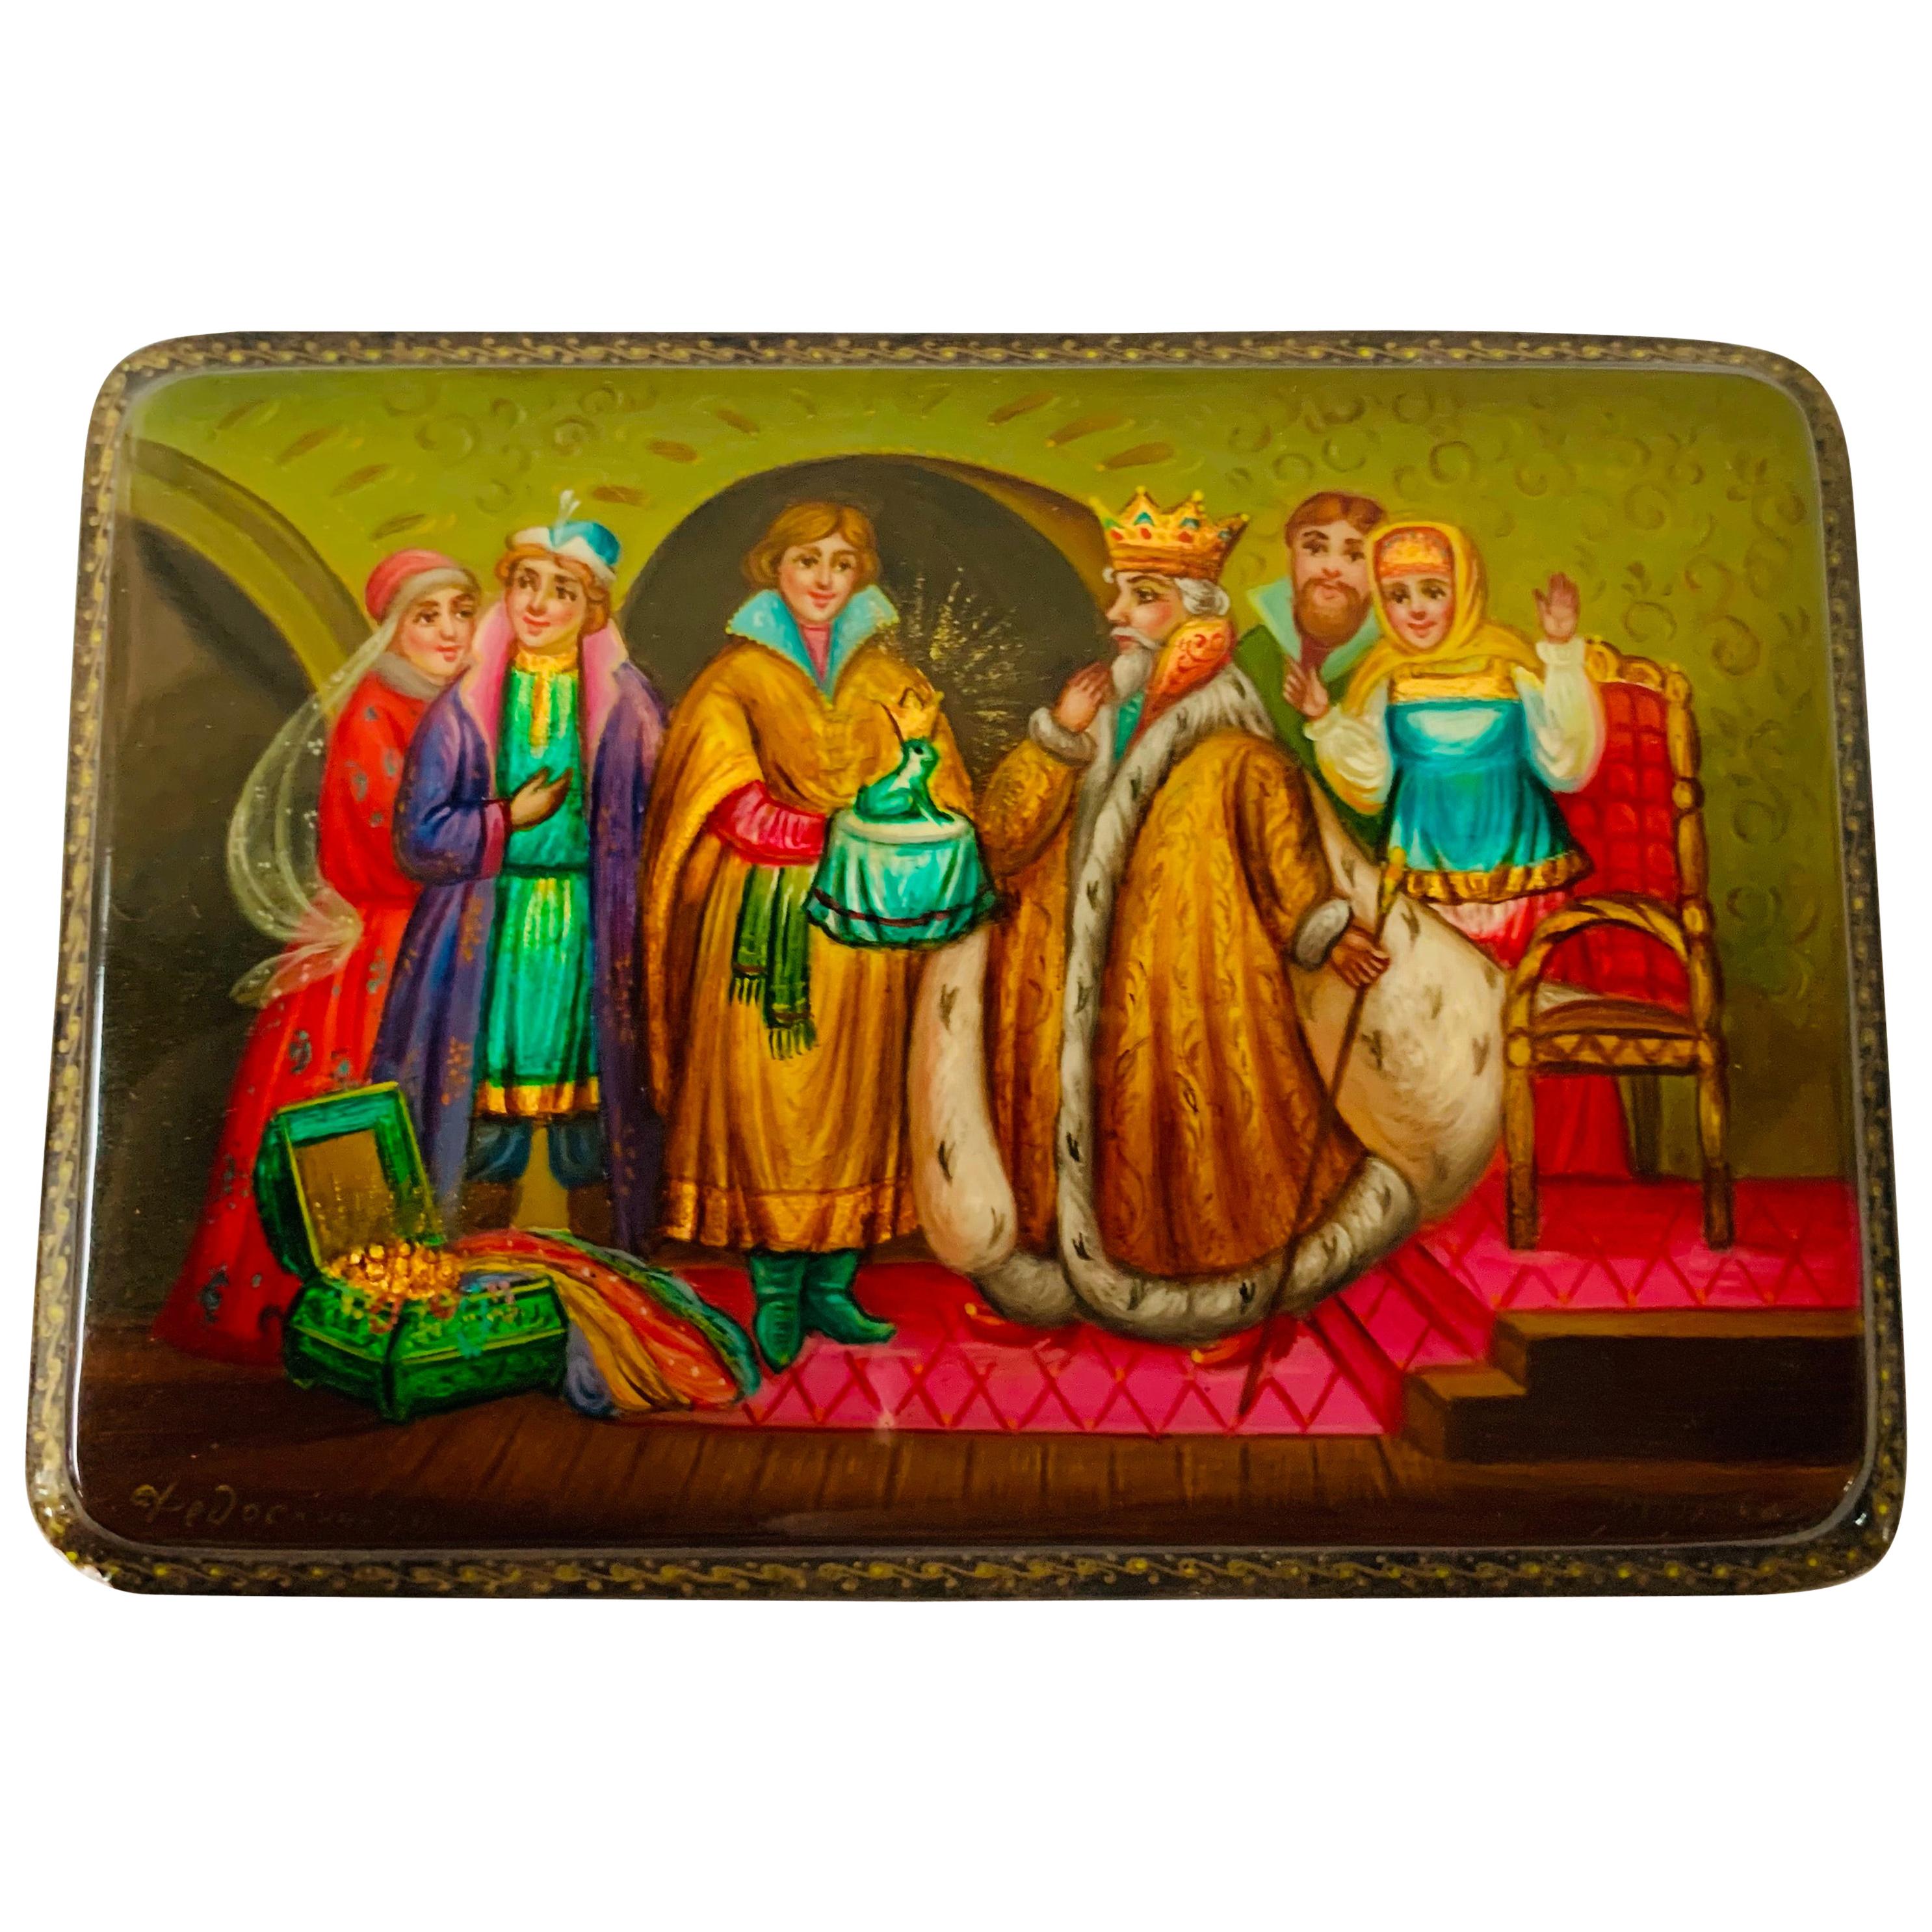 Carved Wood Box Wood Box with Russian City Keepsake Box Hand Painted Wood Trinket Box from Russia Jewelry Box